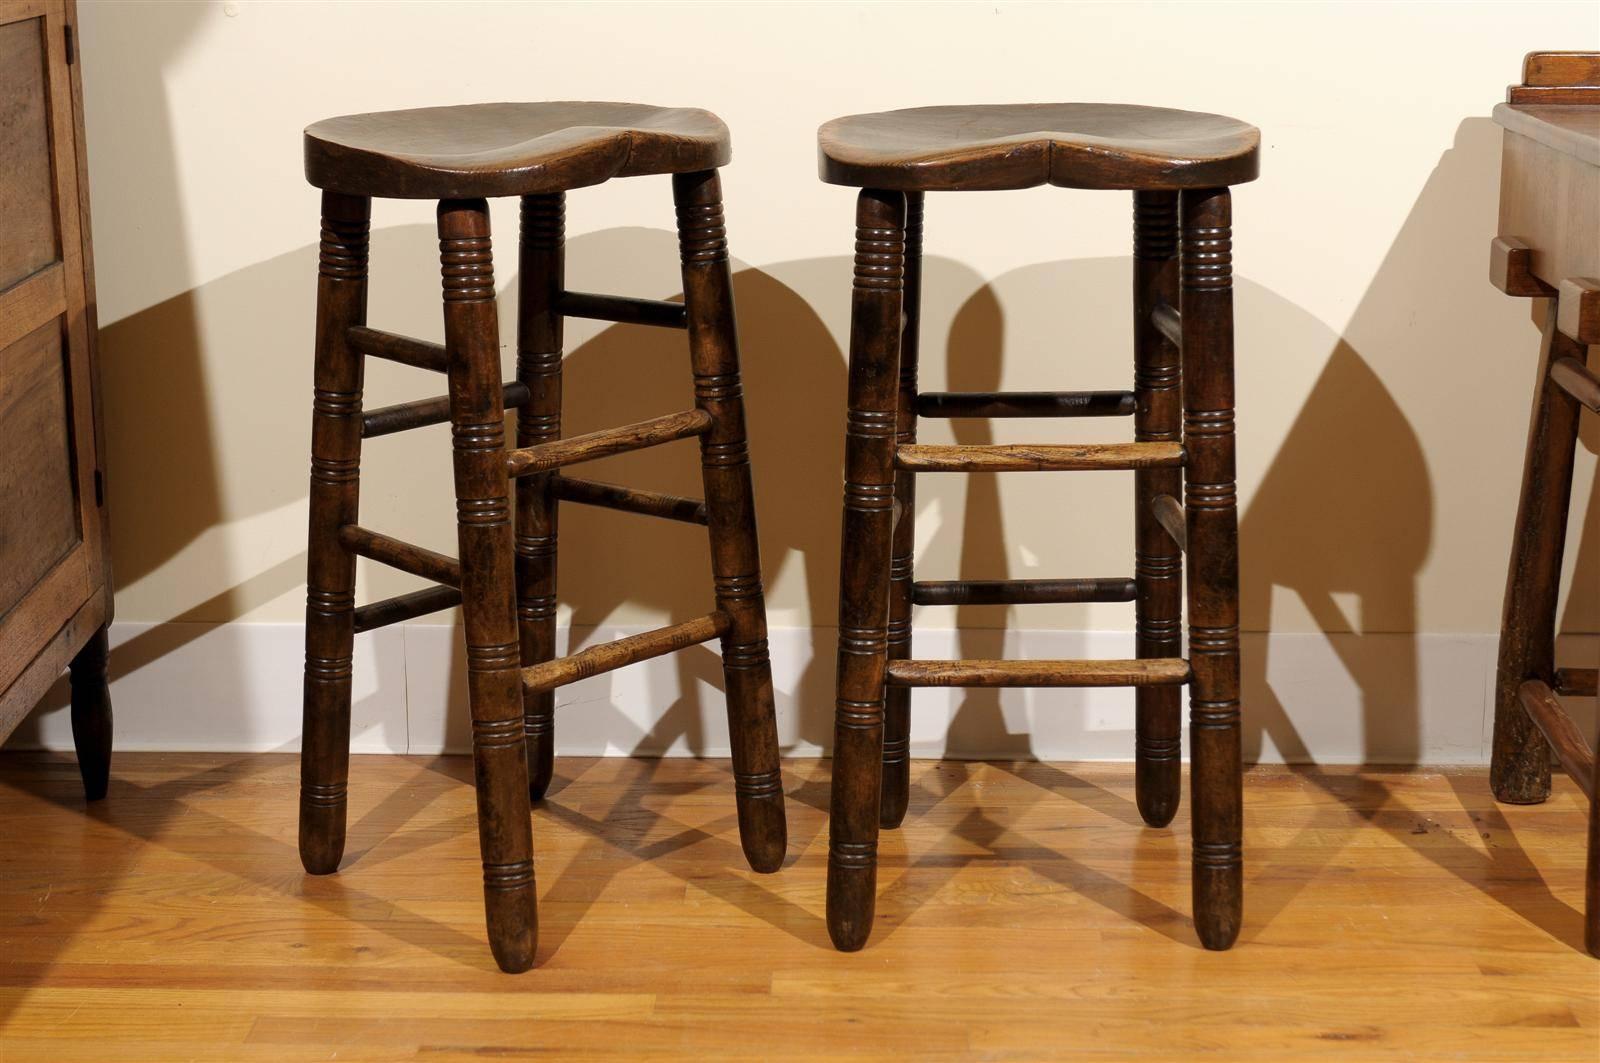 This is a pair of comfortable and charming stools that would add Ambience to your bar area. These stools sit beautifully and the legs and foot rests are hand-turned with ribbing to add character and detail. They were made in England out of oakwood.